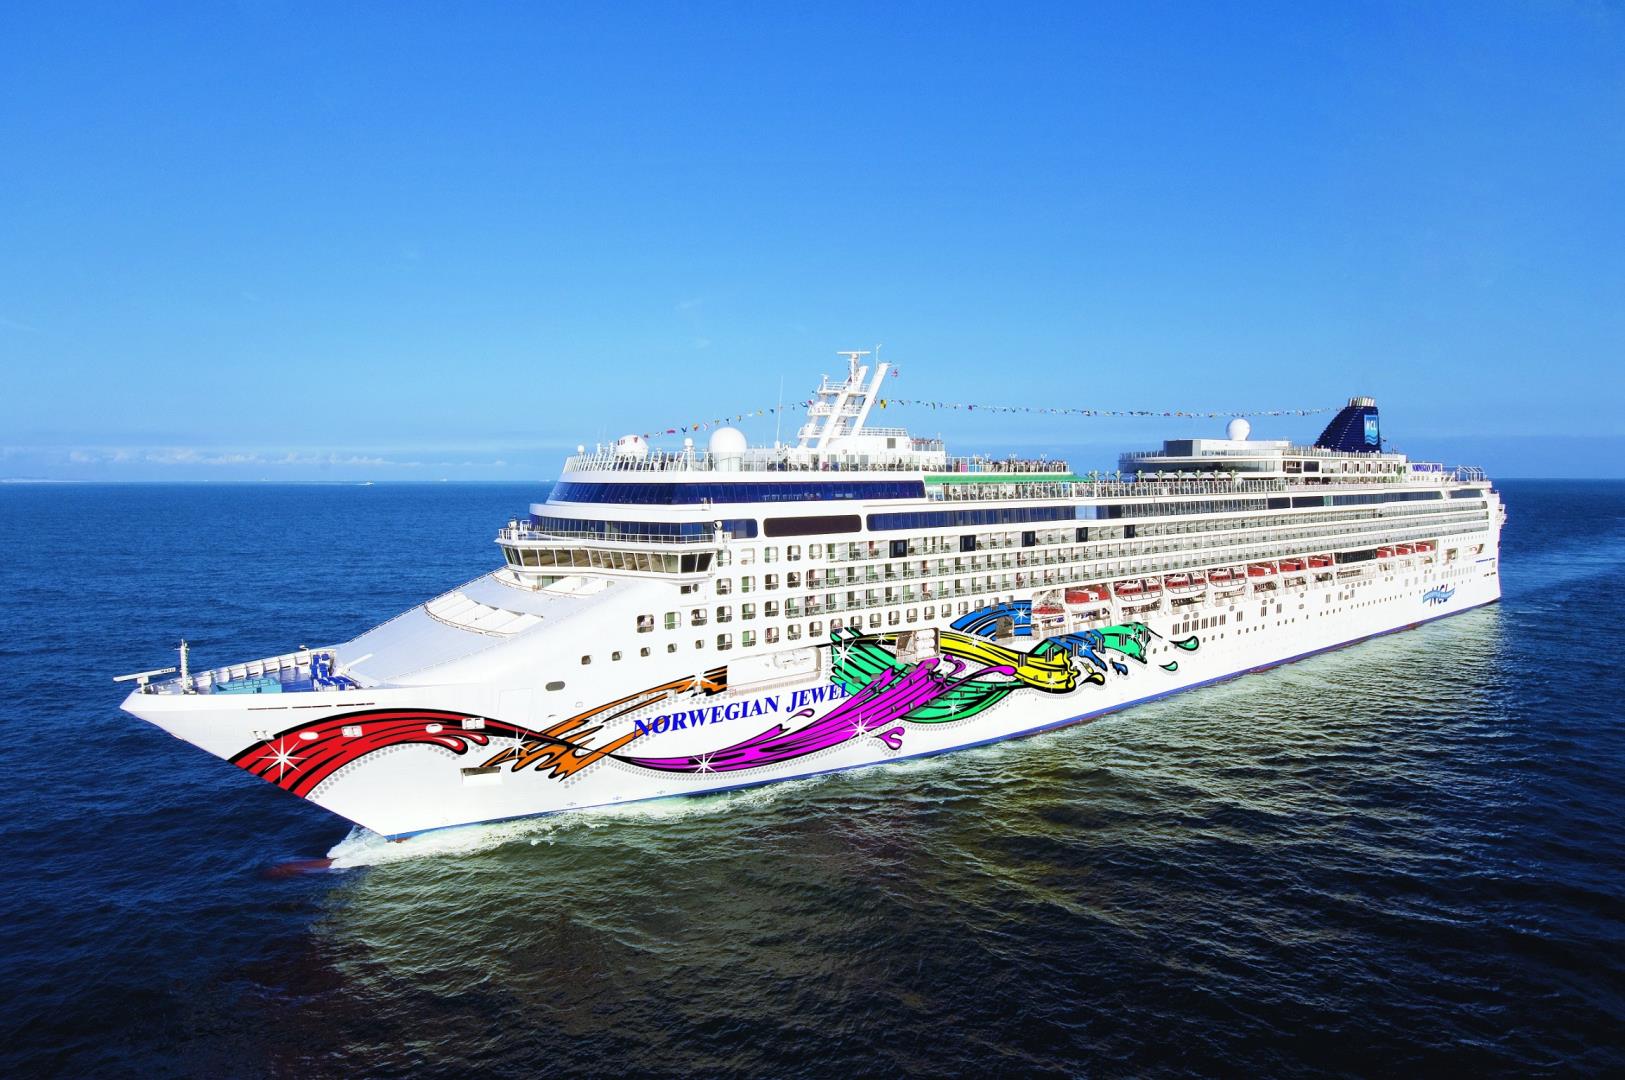 14-day Cruise to Panama Canal: Costa Rica & Dominican Republic from Tampa, Florida on Norwegian Jewel